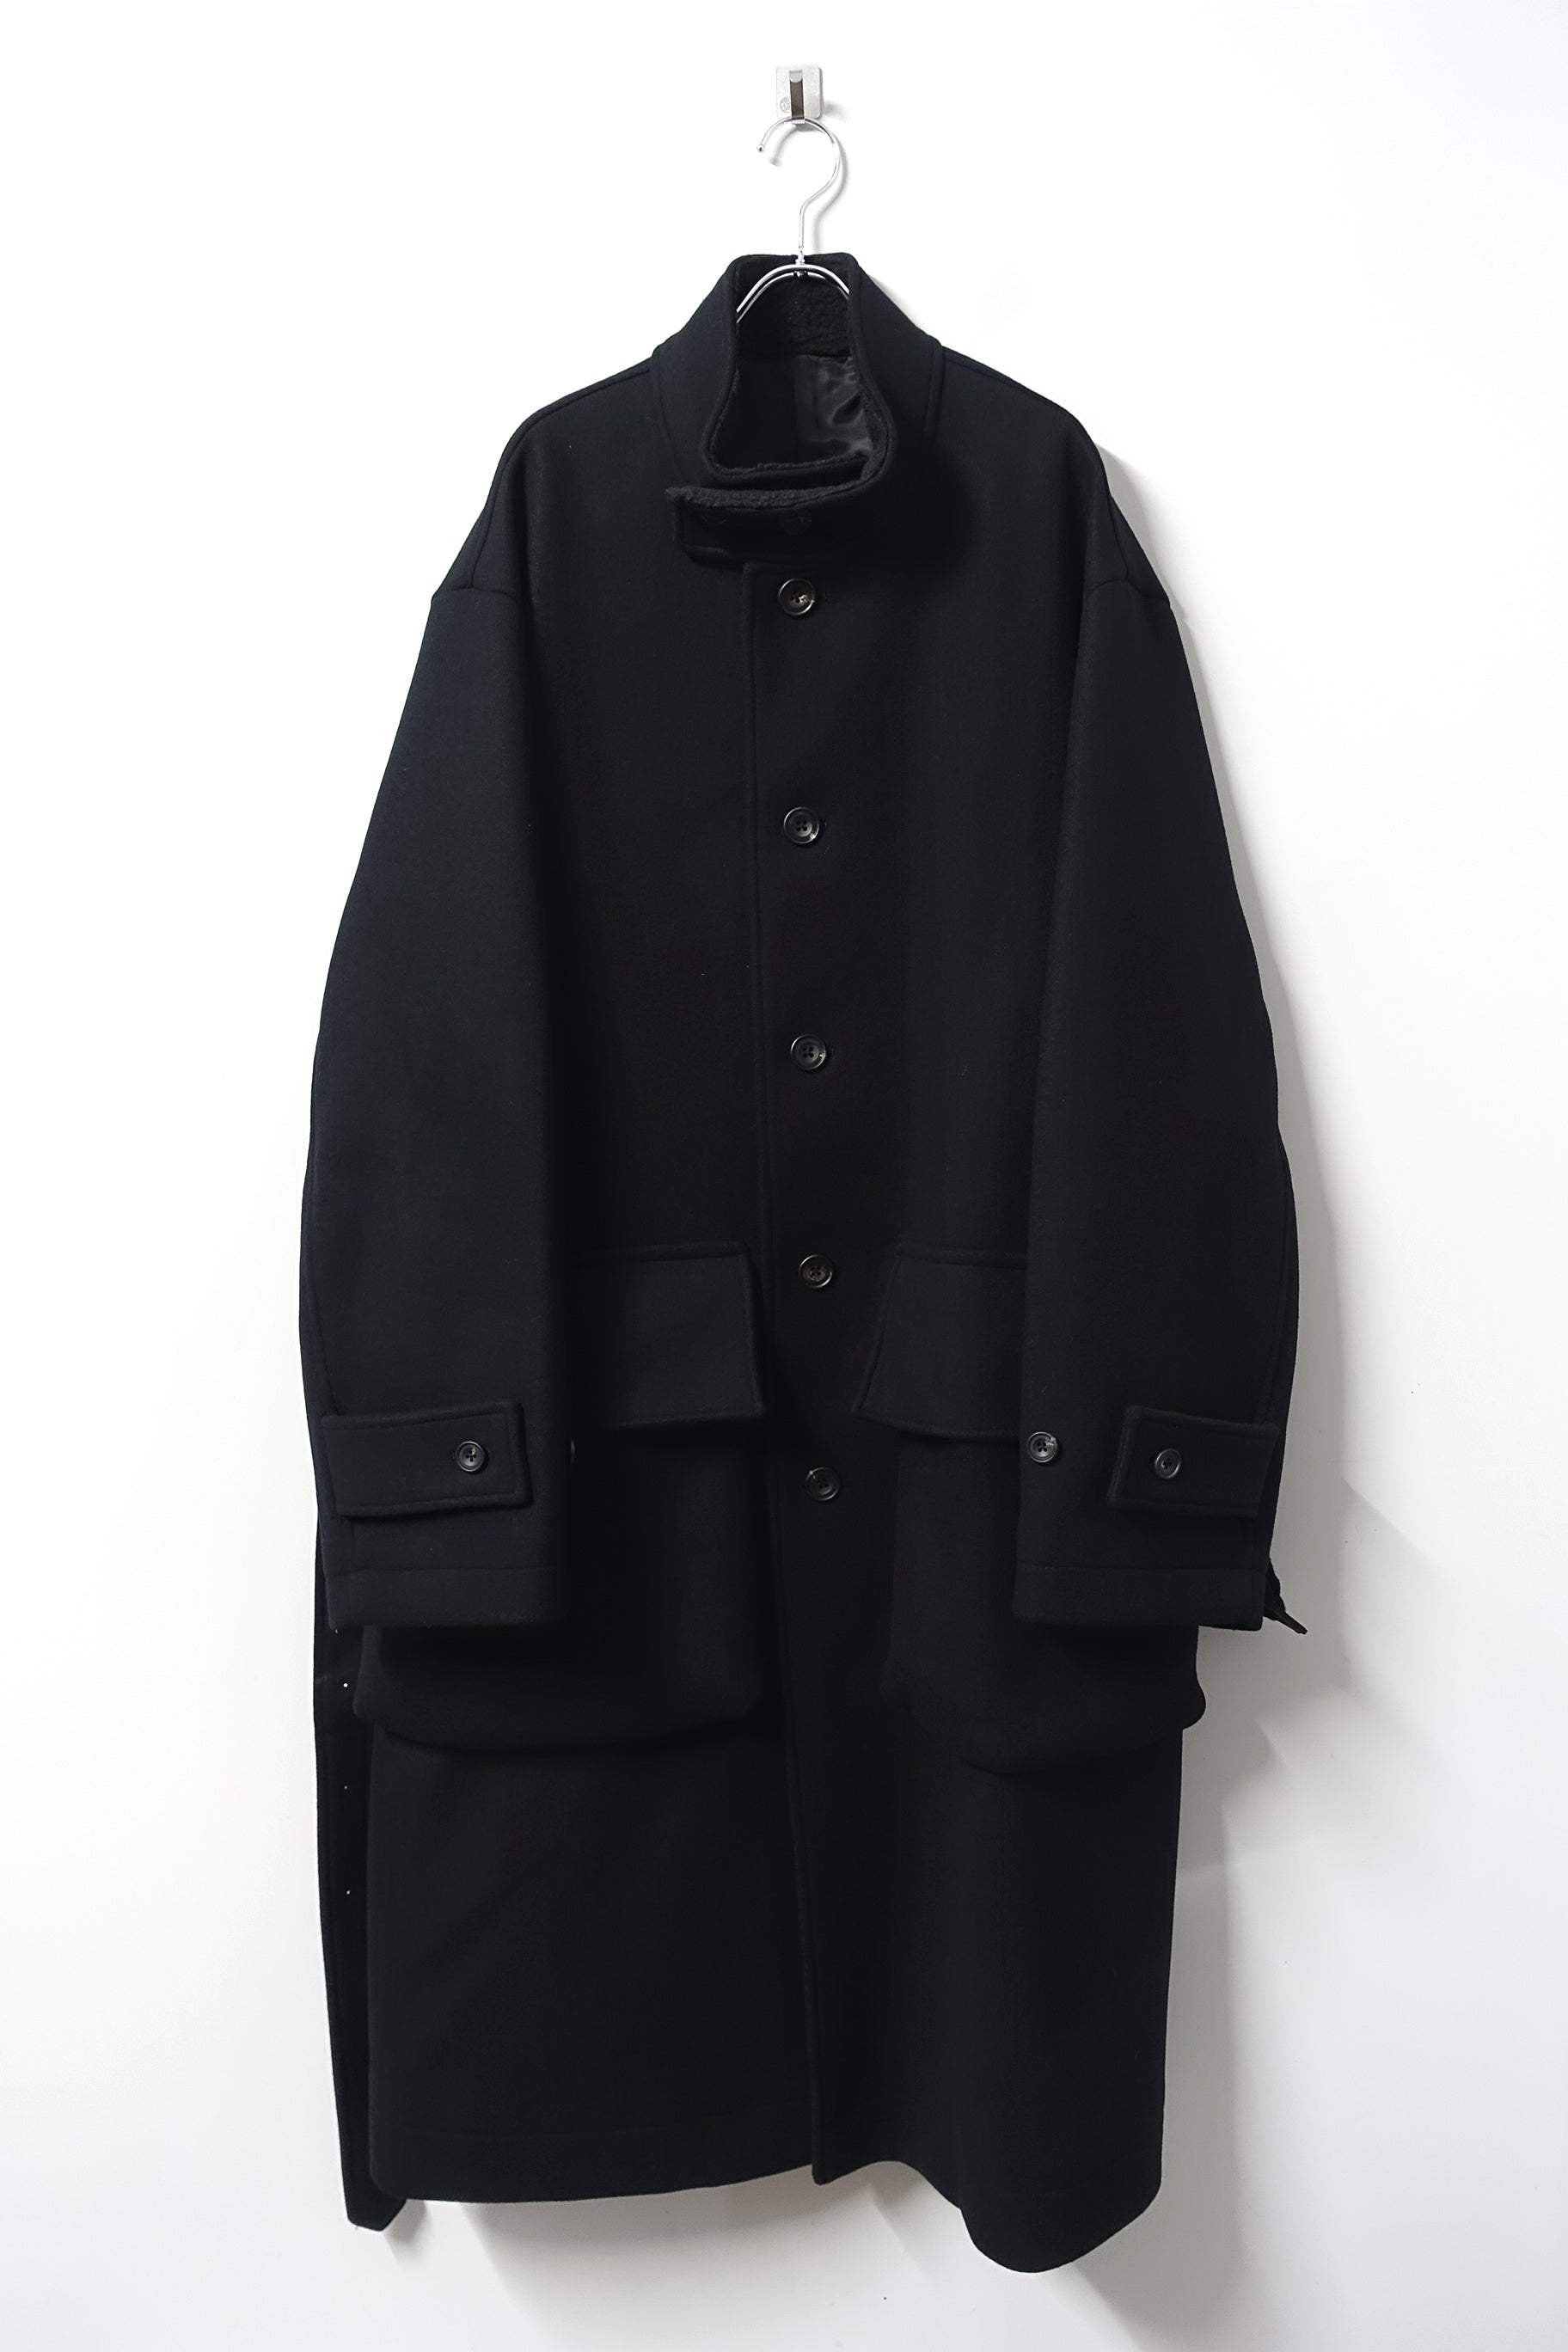 stein(シュタイン)/OVER SLEEVE STAND COLLAR COAT/Black 通販 取り扱い-CONCRETE RIVER